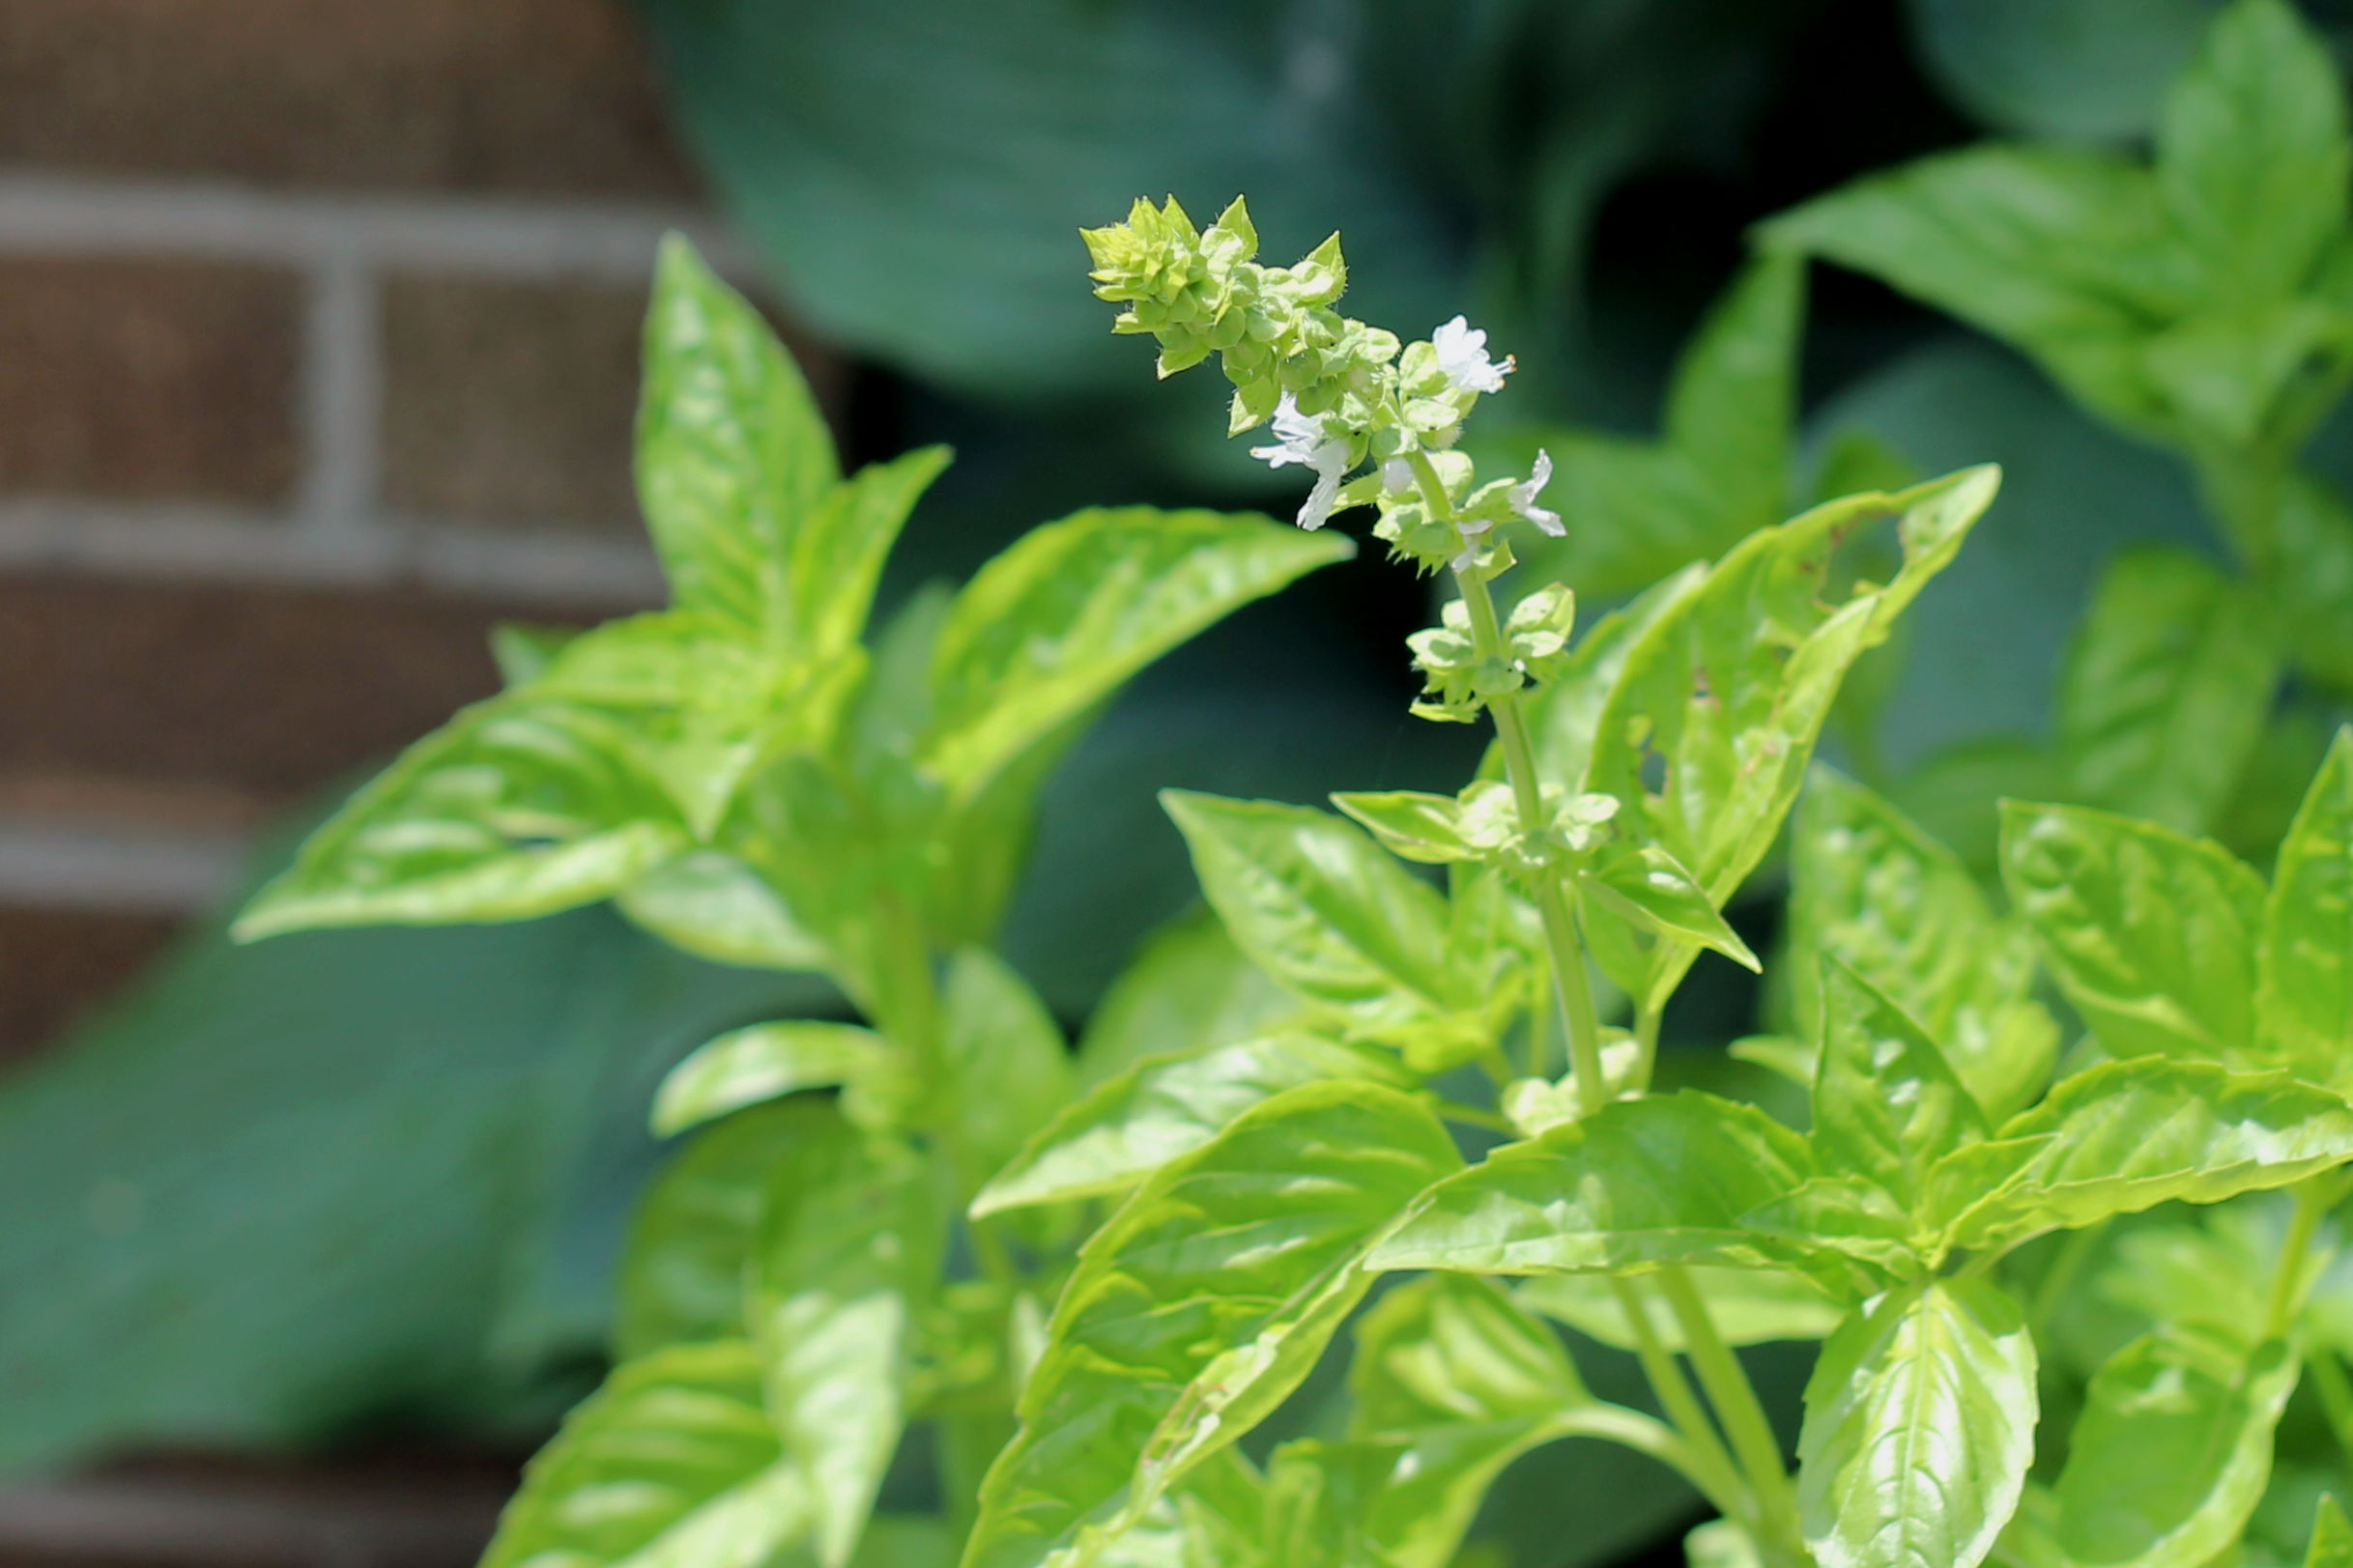 Close up image of a basil flower.